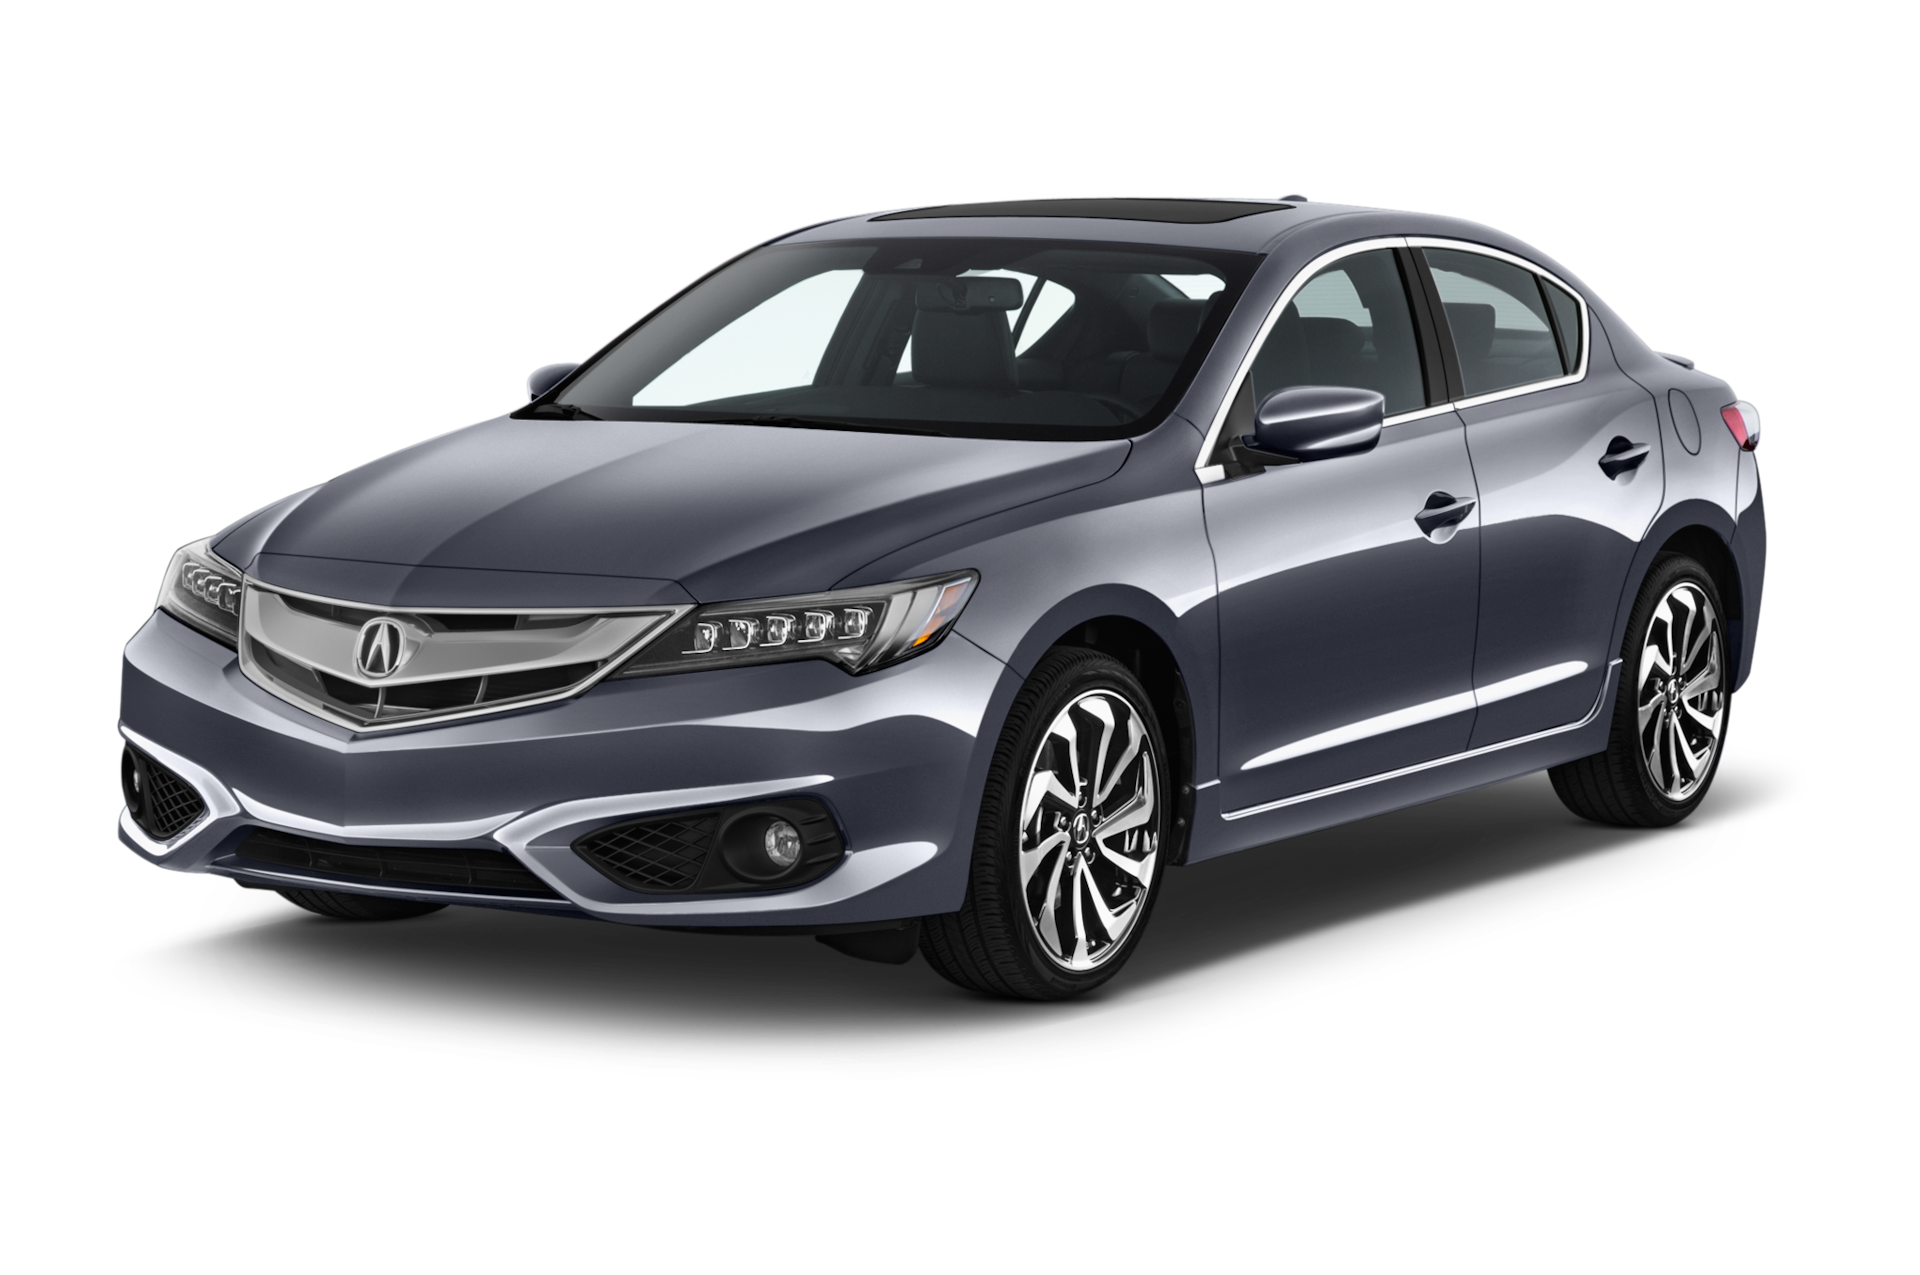 2016 Acura ILX Prices, Reviews, and Photos - MotorTrend